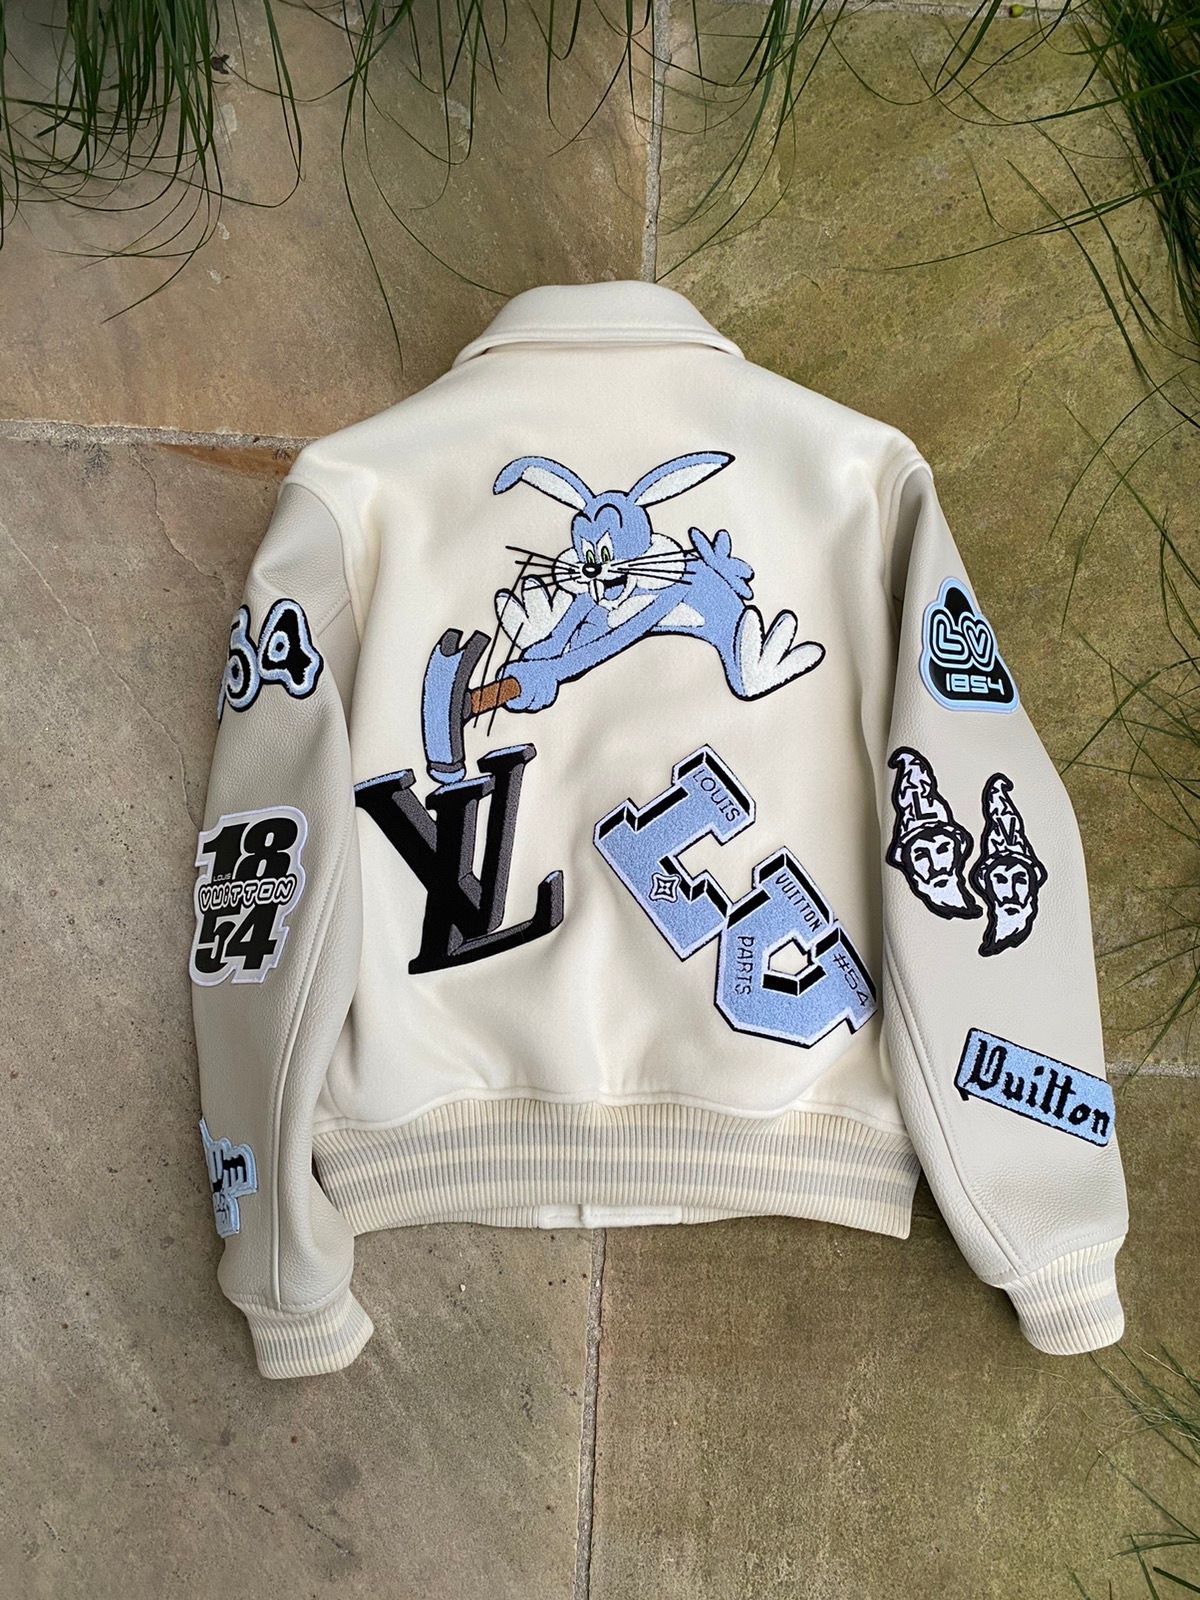 Wool and Leather Cream Louis Vuitton Bunny Varsity Jacket - Jacket Makers